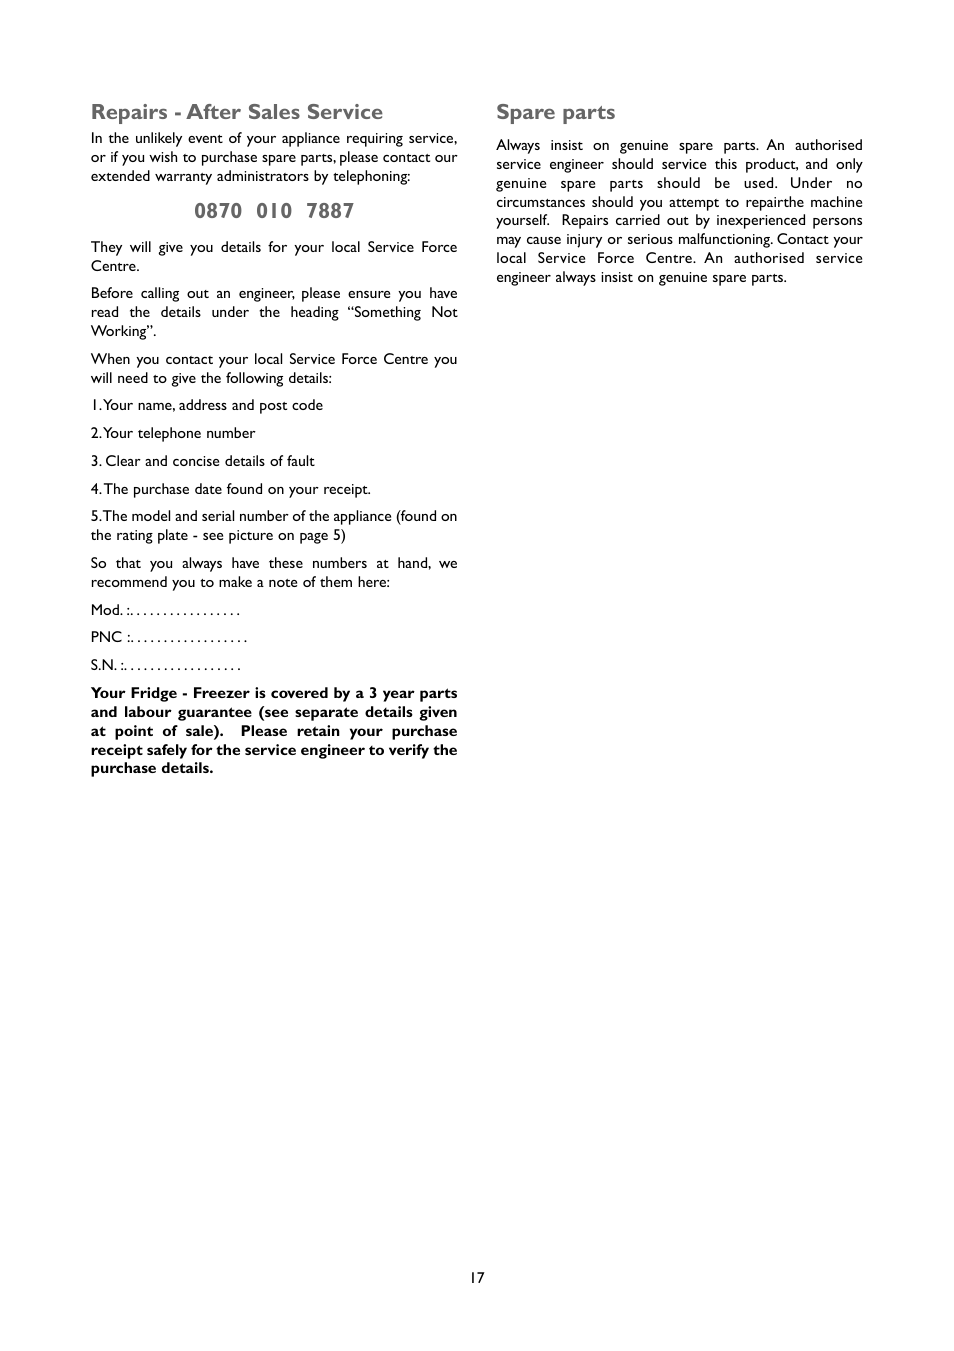 Repairs - after sales service, Spare parts | John Lewis JLUCFZW6002 User Manual | Page 17 / 20